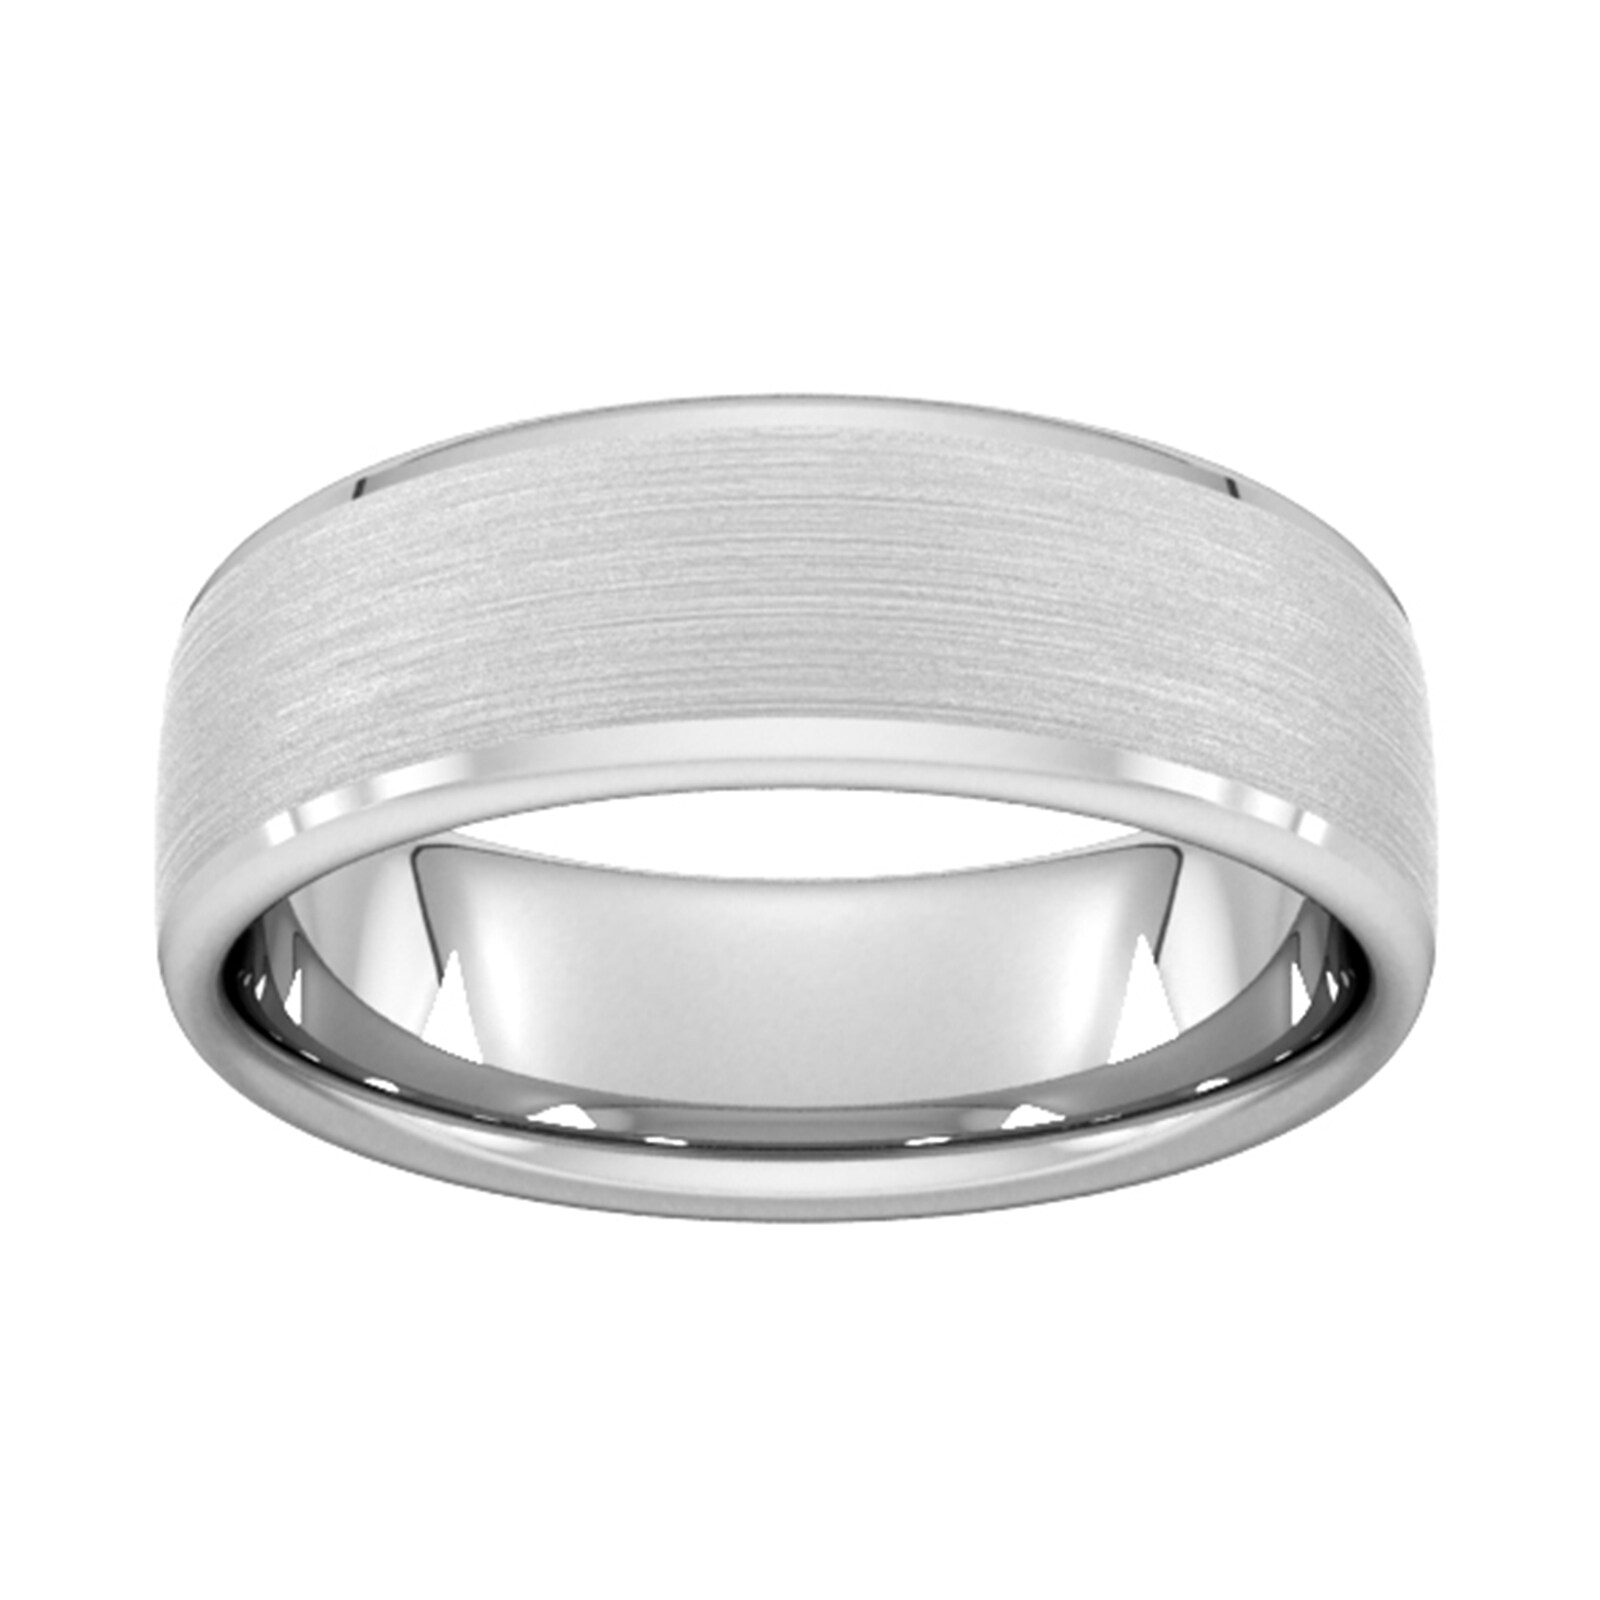 7mm Slight Court Heavy Polished Chamfered Edges With Matt Centre Wedding Ring In 9 Carat White Gold - Ring Size W